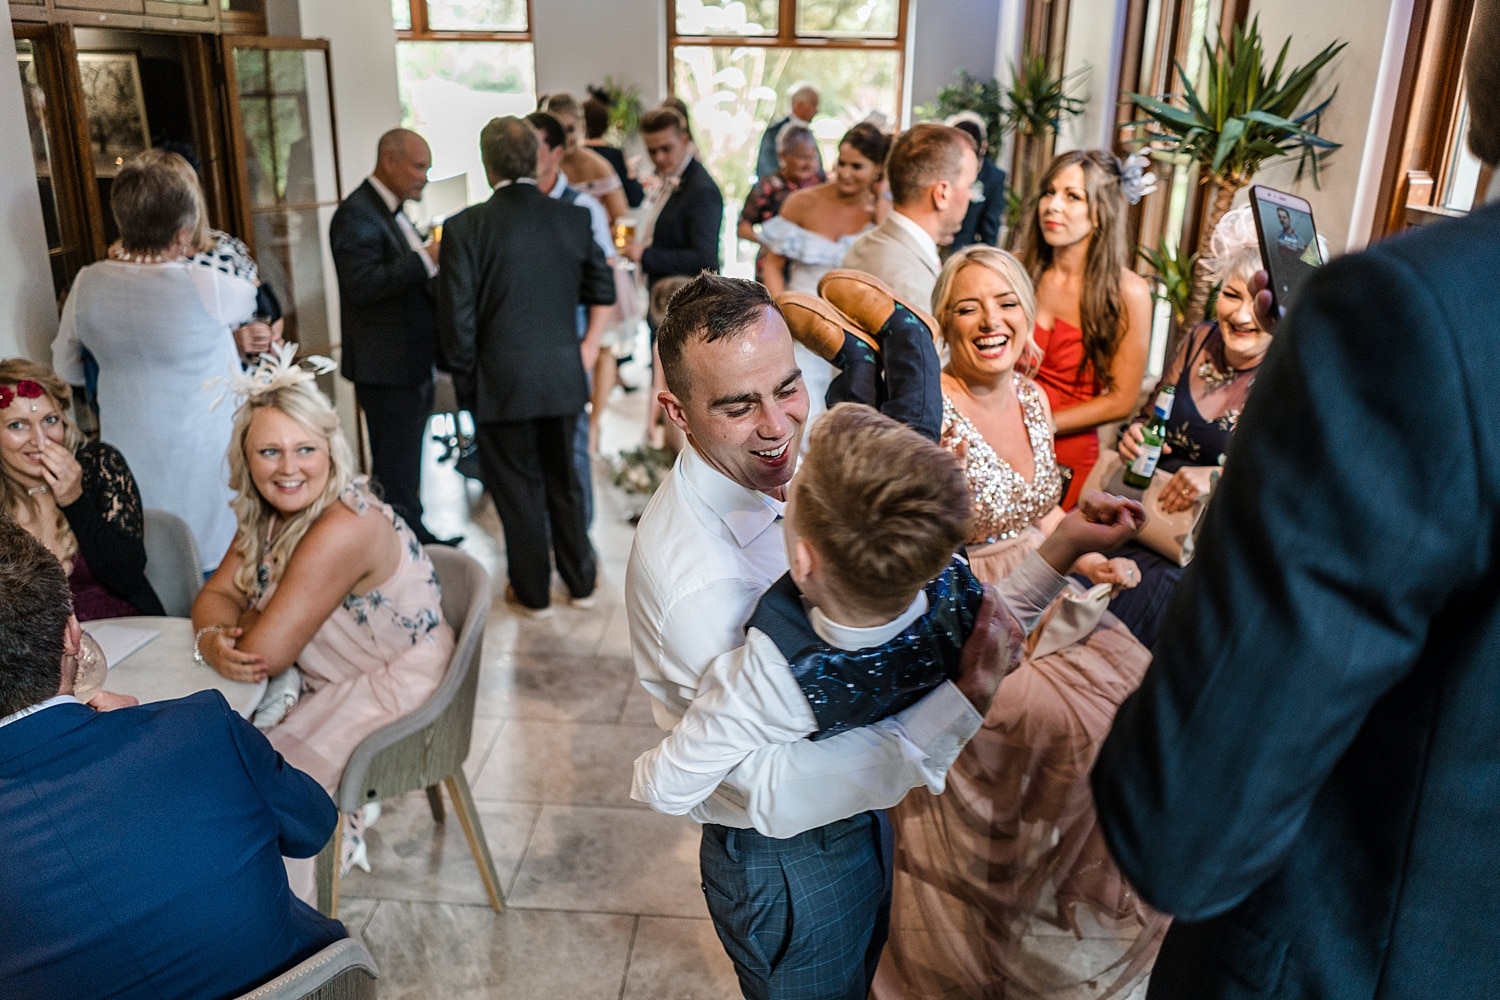 Wedding celebrations at Fairyhill, South Wales